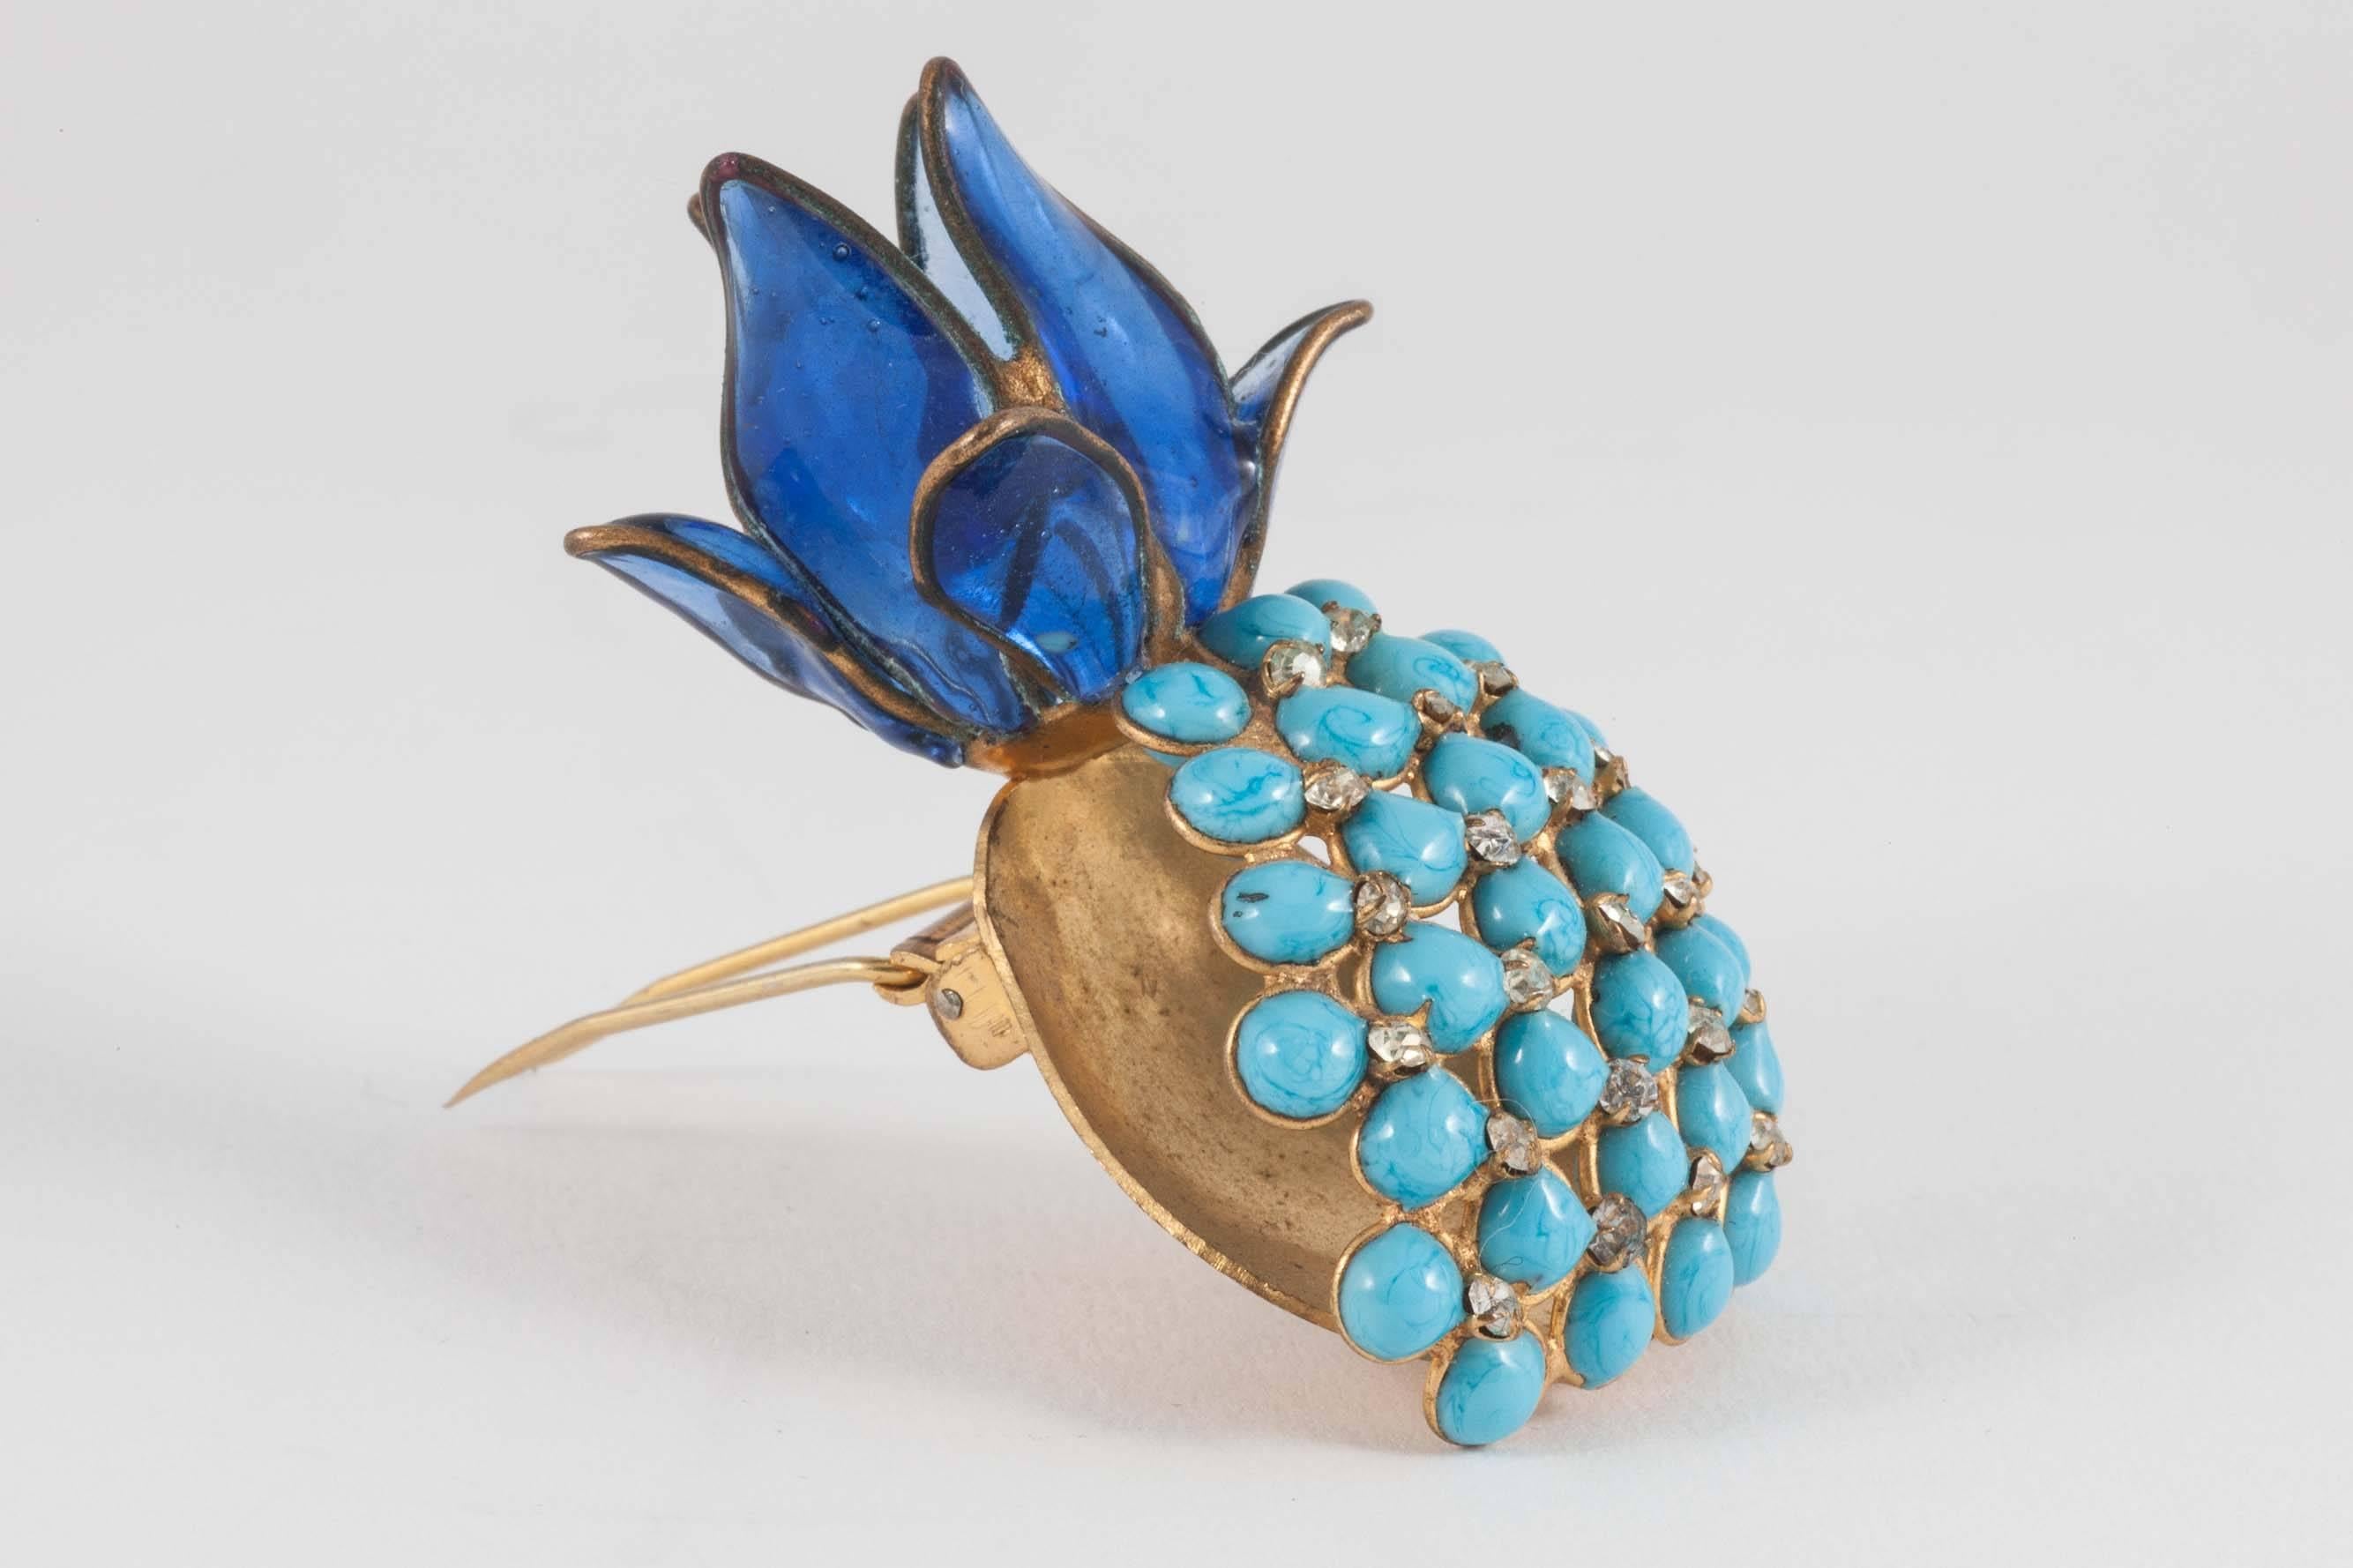 Quirky and charming brooch, in the form of a 'pineapple', made by Maison Gripoix in the 1960s. Transparent poured glass form the leaves on the top, , opaque turquoise cabuchons portray the uneven surface of the pineapple itself, interspersed with